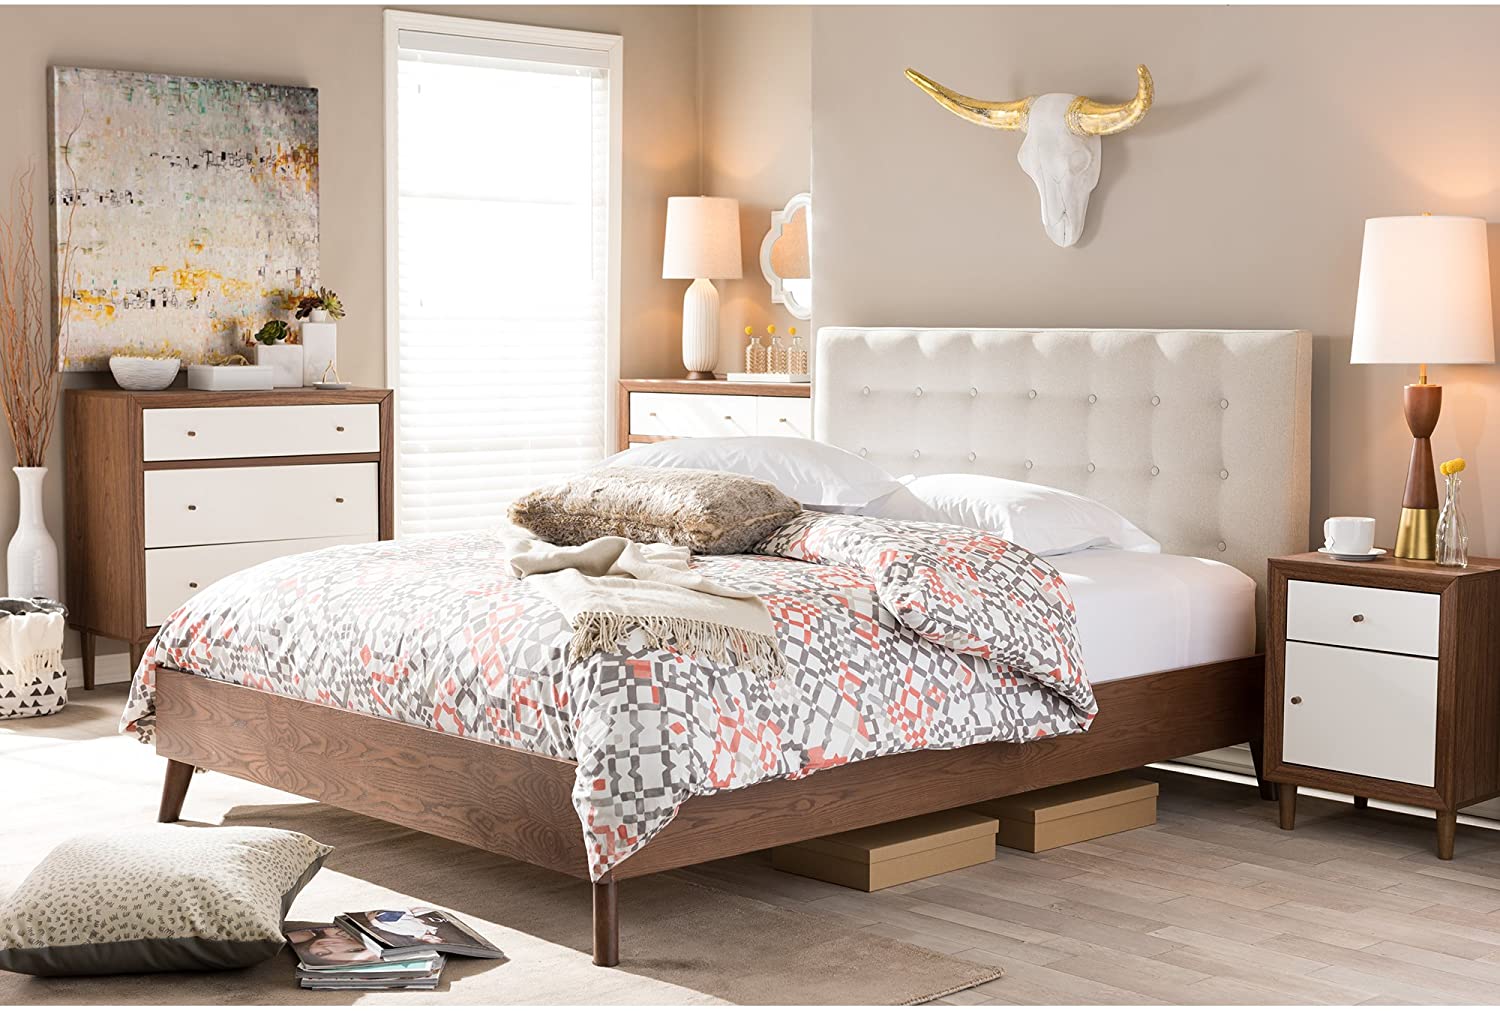 The Alinia full size fabric upholstered platform bed in grey has a beautiful walnut veneer finish that will bring a touch of elegance to your room. The large tapered headboard` with button-tufting design is the focal point to this bed` upholstered in fab